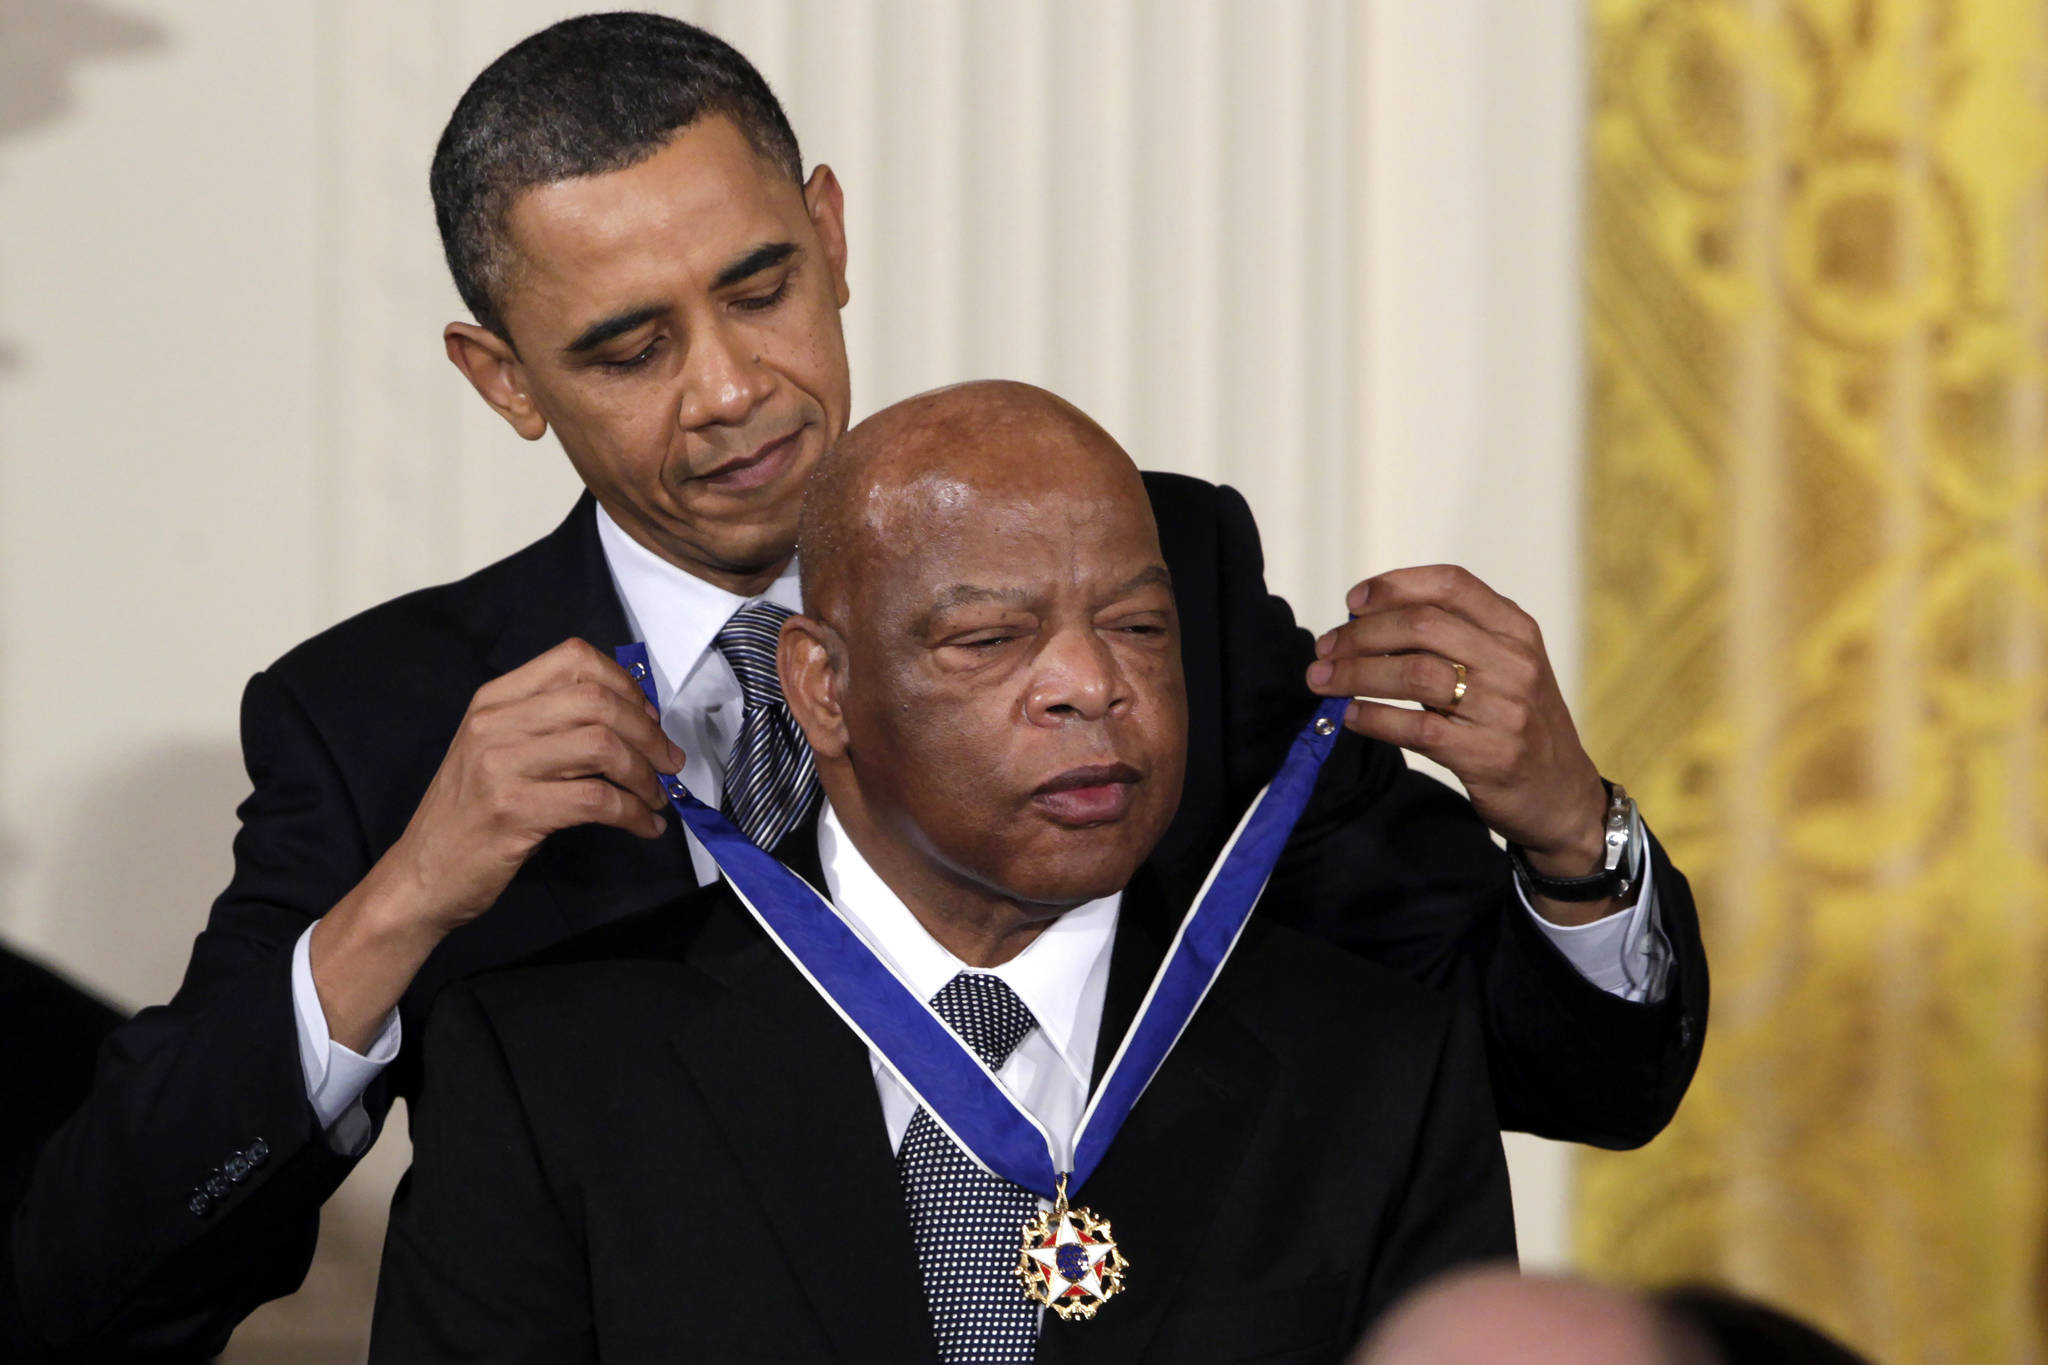 In this February 2011 photo, then-President Barack Obama presents a 2010 Presidential Medal of Freedom to U.S. Rep. John Lewis, D-Ga., during a ceremony in the East Room of the White House in Washington. Lewis, who carried the struggle against racial discrimination from Southern battlegrounds of the 1960s to the halls of Congress, died Friday, July 17, 2020. (AP Photo/Carolyn Kaster, File)